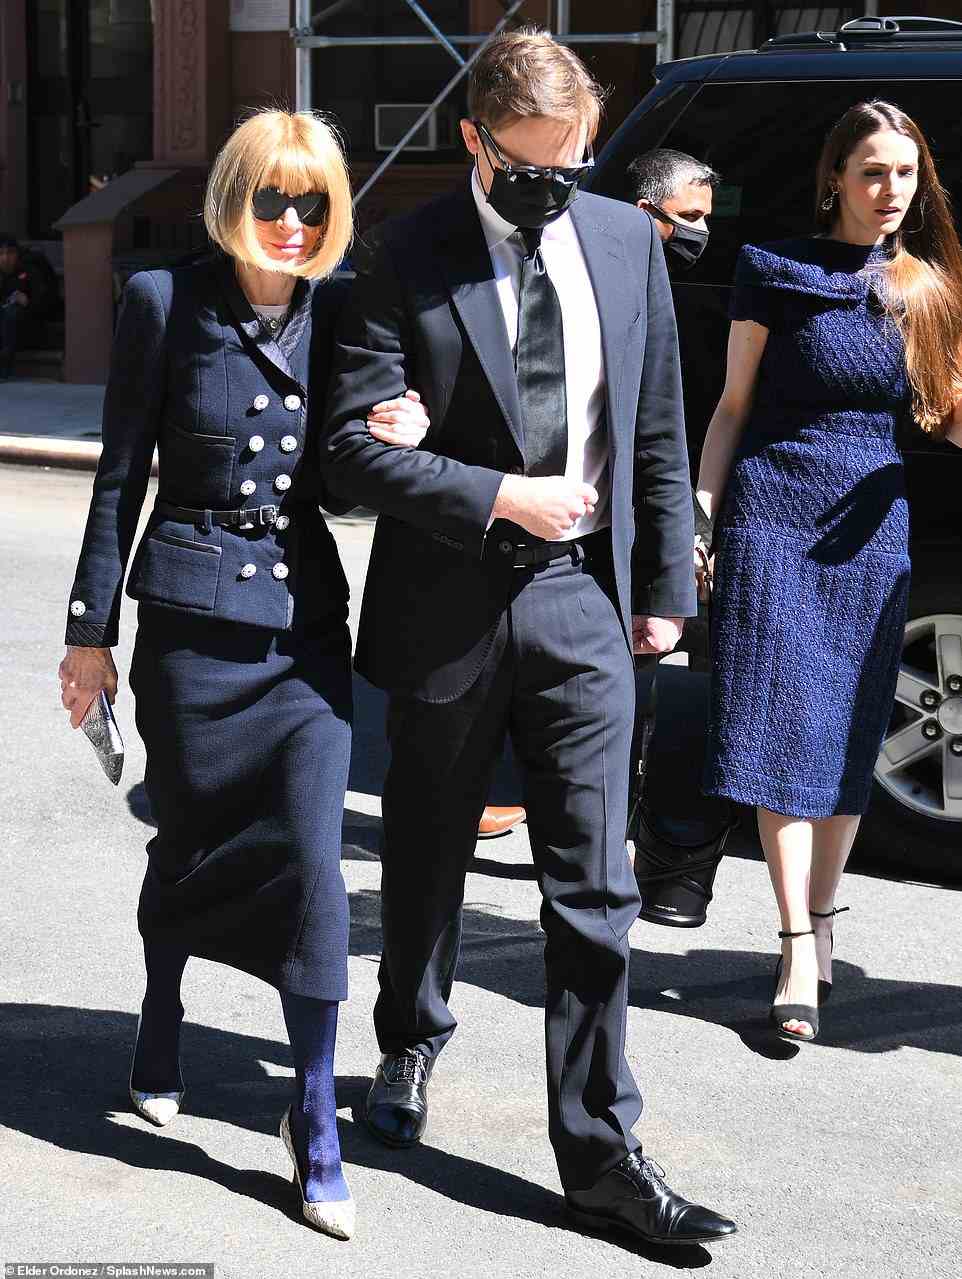 She clutched tightly to her son, Charles - a 37-year-old doctor who kept it simple in a black suit. They were joined by Wintour's daughter, Bee Shaffer, 34, who opted for a tight-fitting indigo dress